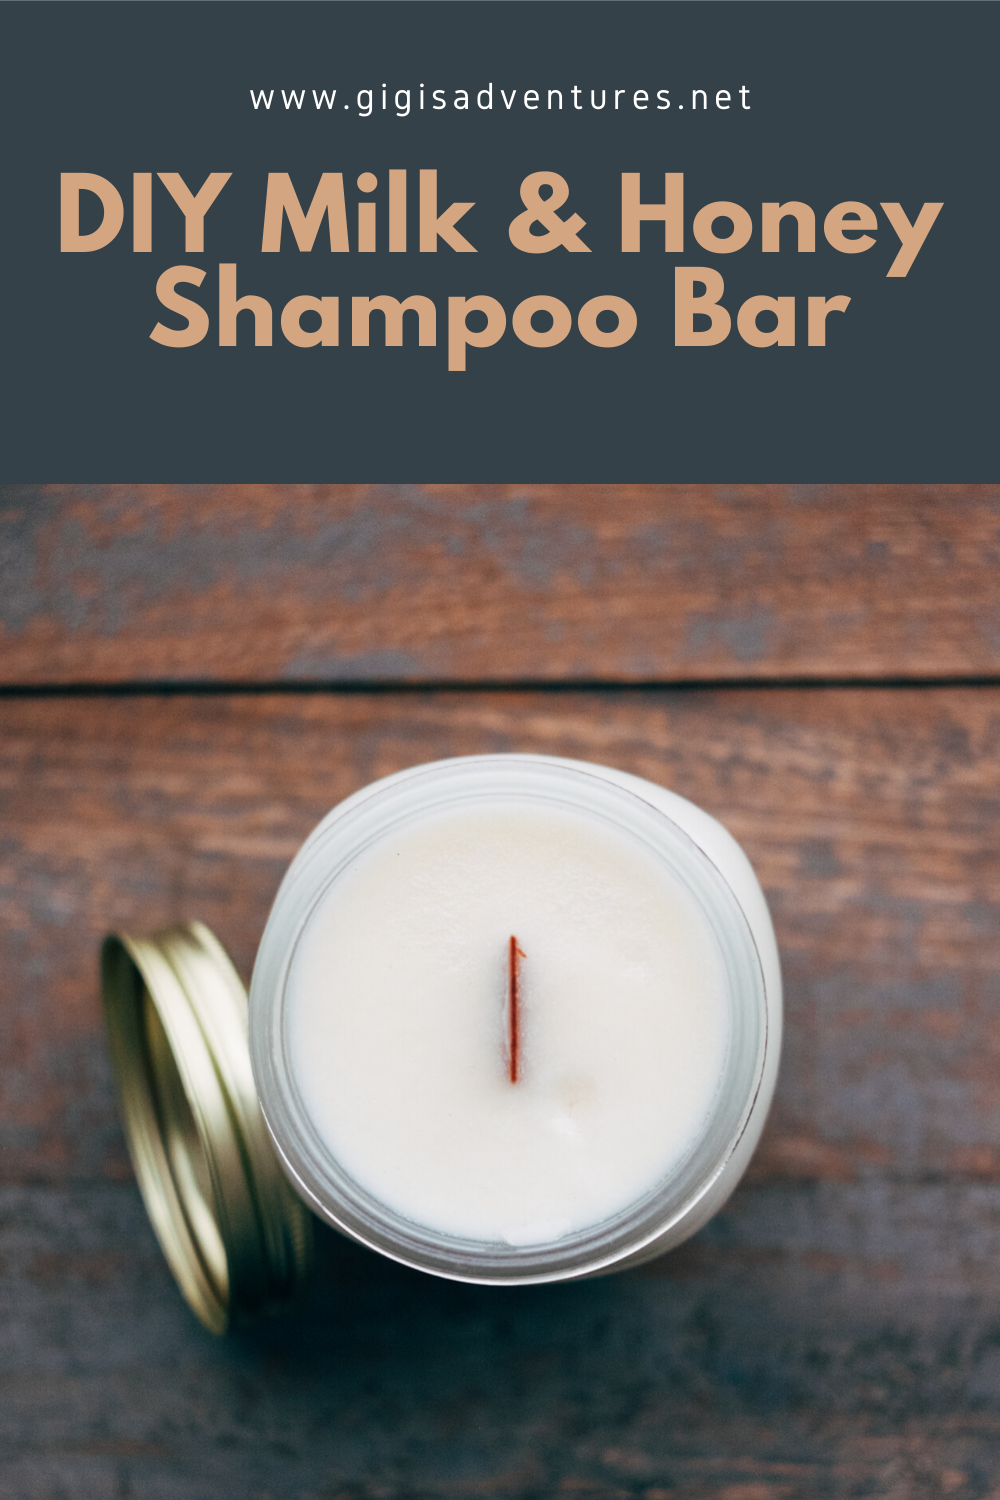 This DIY Milk and Honey Shampoo Bar is perfect to transform your hair in the cheapest way possible; it will hydrate, soften and add shine in just 5 minutes!